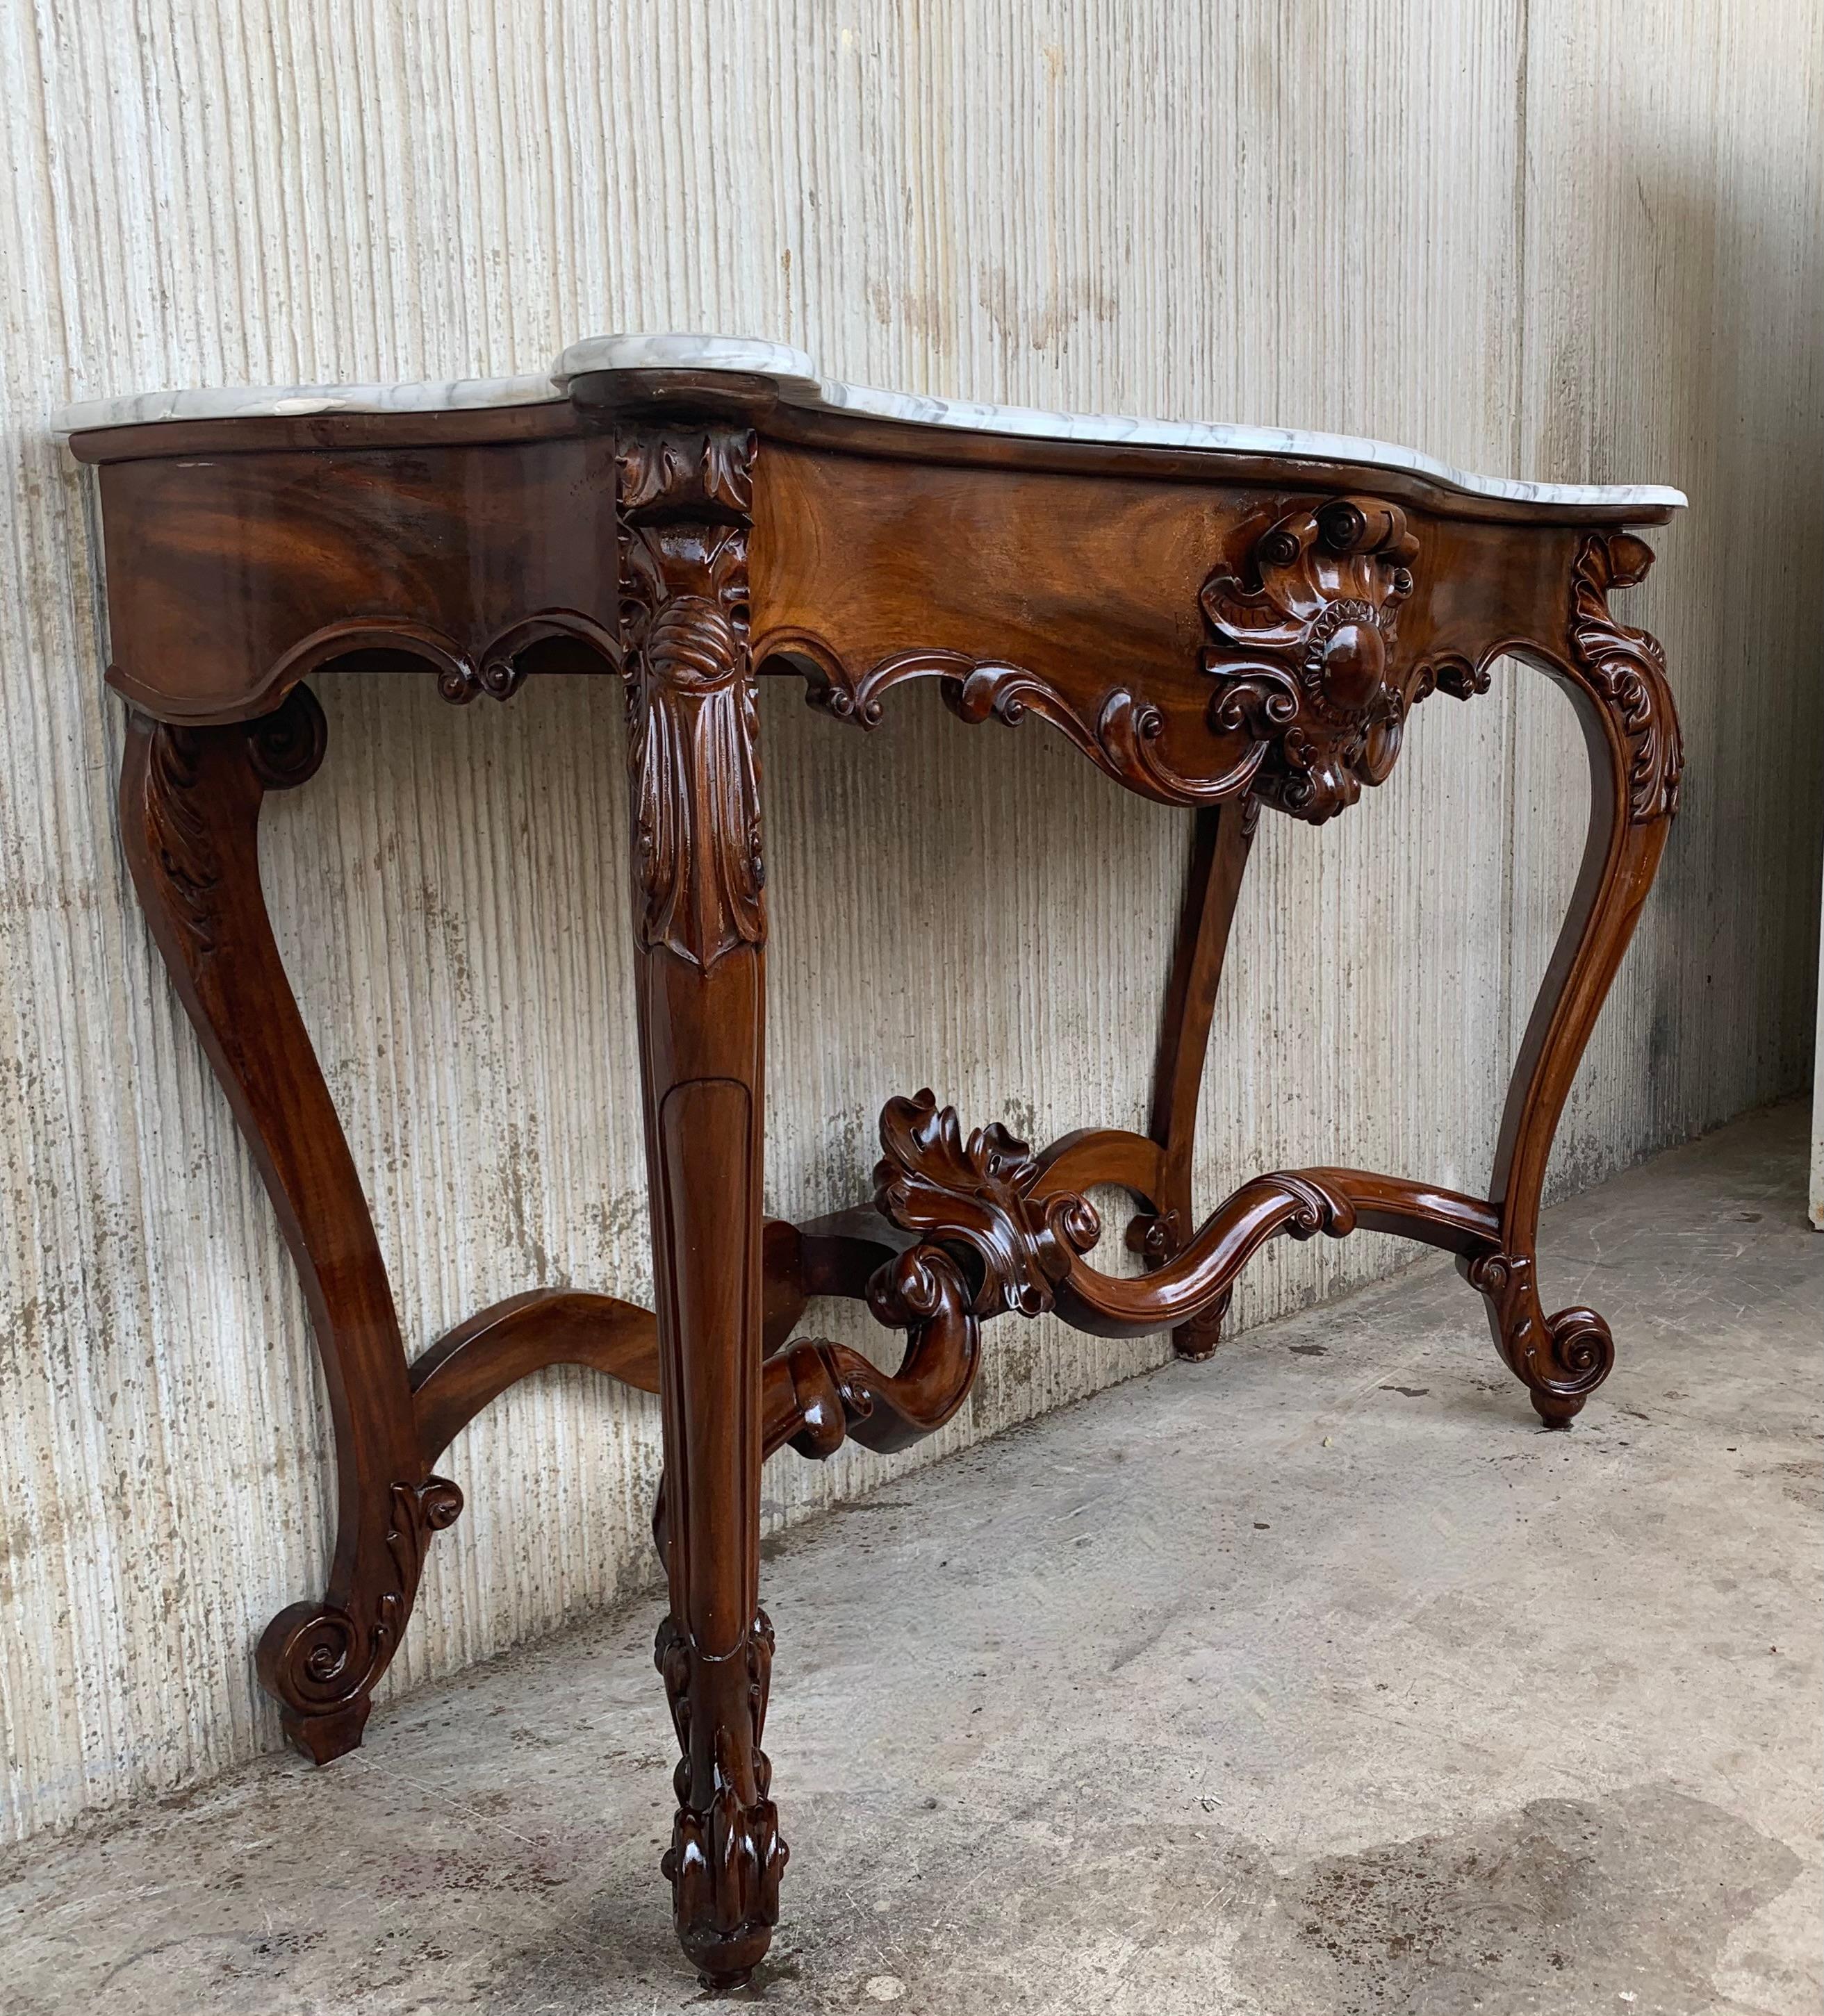 Large French Regency Carved Walnut Console Table with White Marble Top '2 Avai' For Sale 3